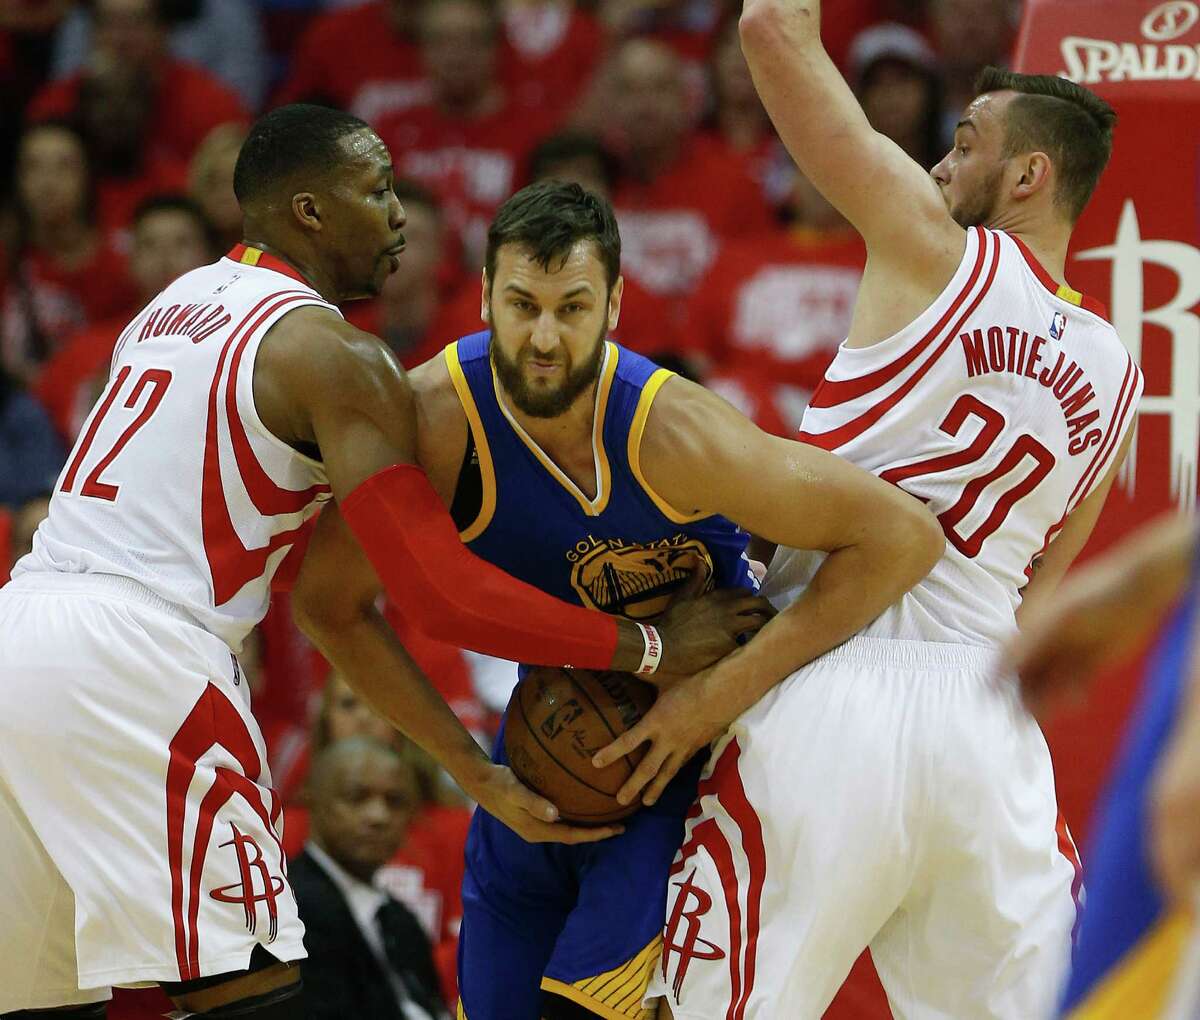 Dwight Howard, left, and Donatas Motiejunas had Warriors center Andrew Bogut sandwiched in the playoffs. But it doesn't look likely Howard will remain a Rockets teammate with Motiejunas next season.